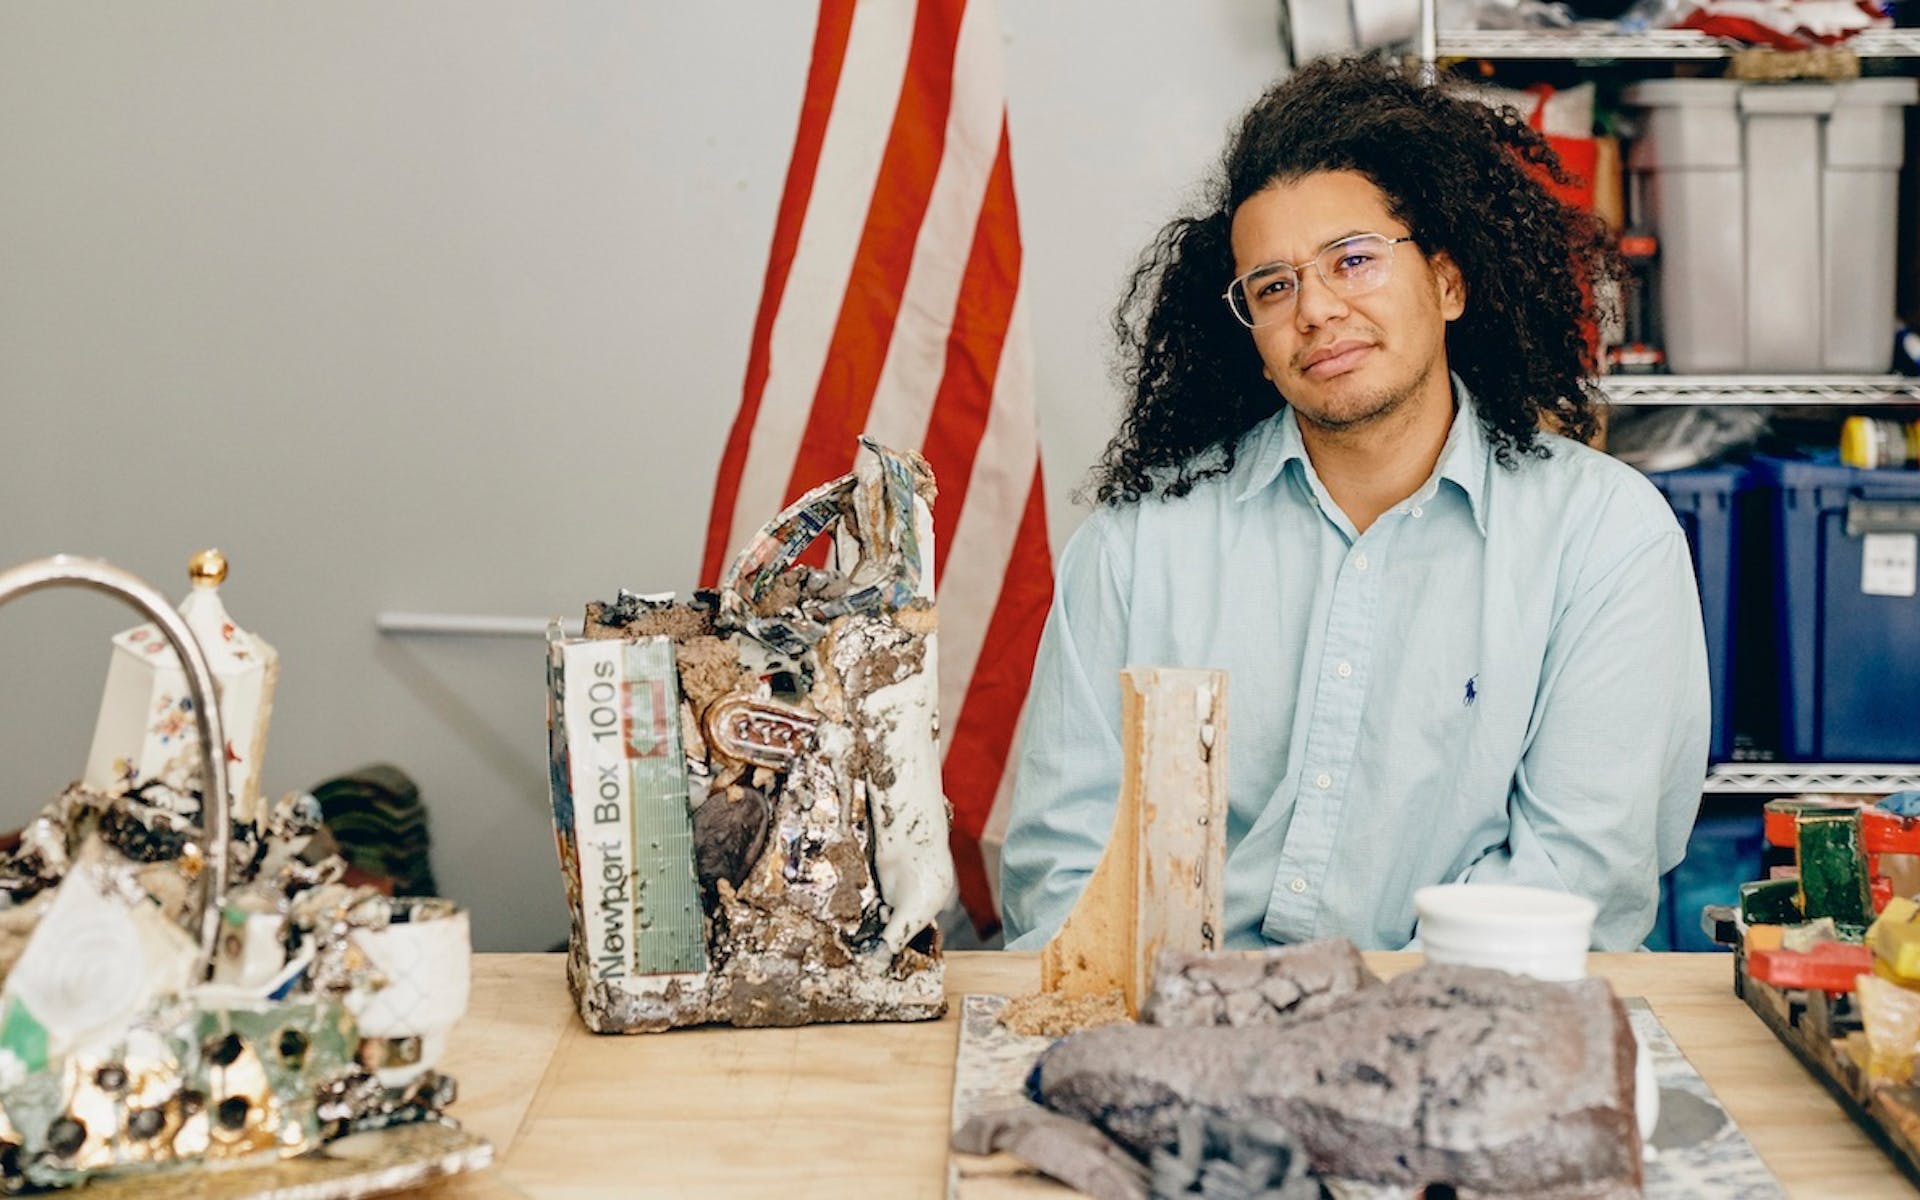 A man sits in a studio at a desk with sculptures made from clay and objects in the street with an American flag on a flagpole behind him.